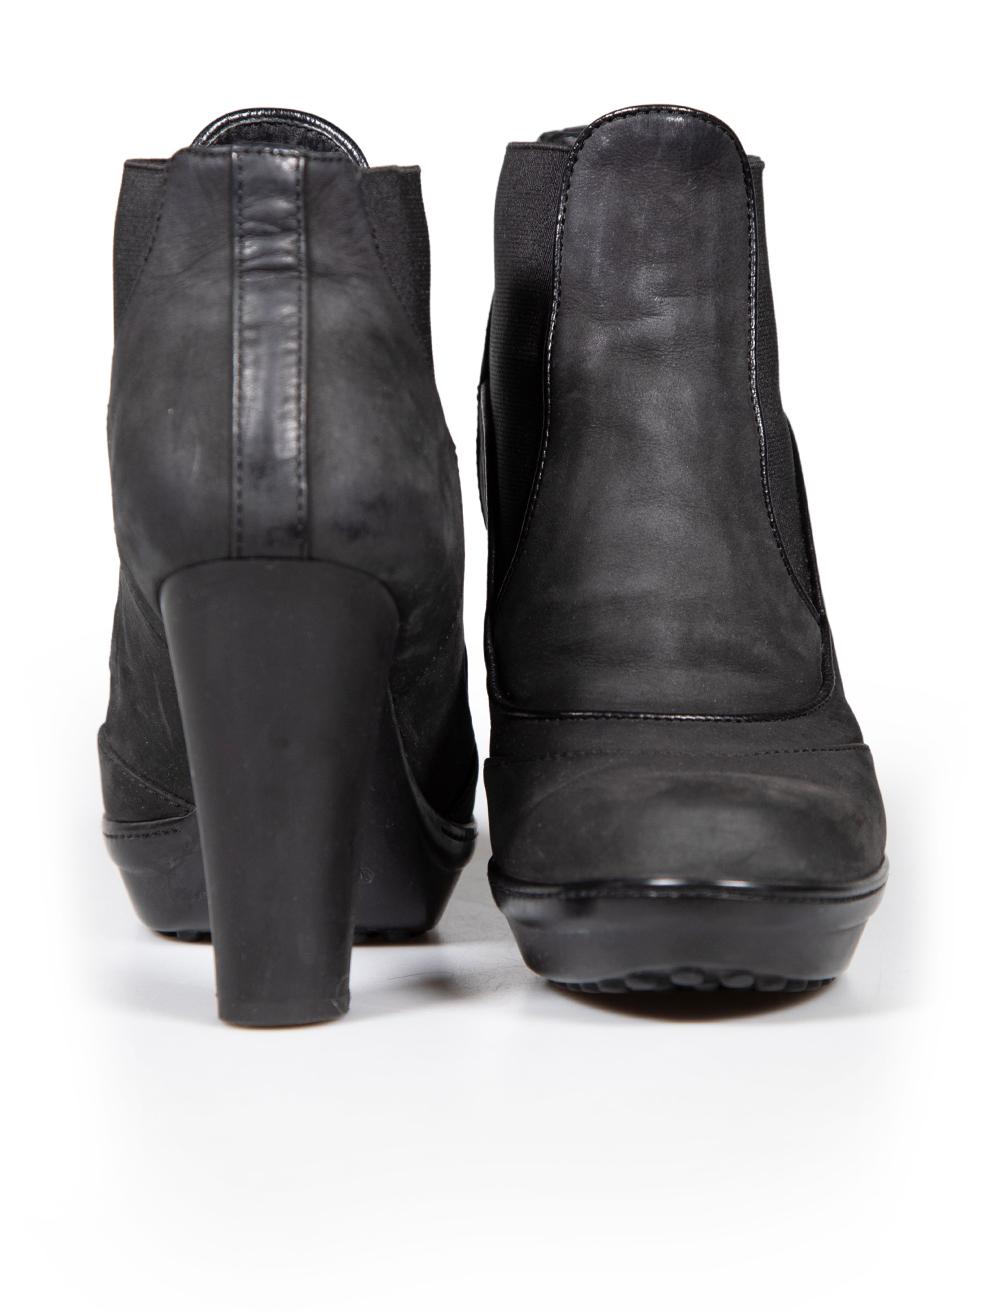 Tod's Black Leather Ankle High Heeled Boots Size IT 38 In Good Condition For Sale In London, GB